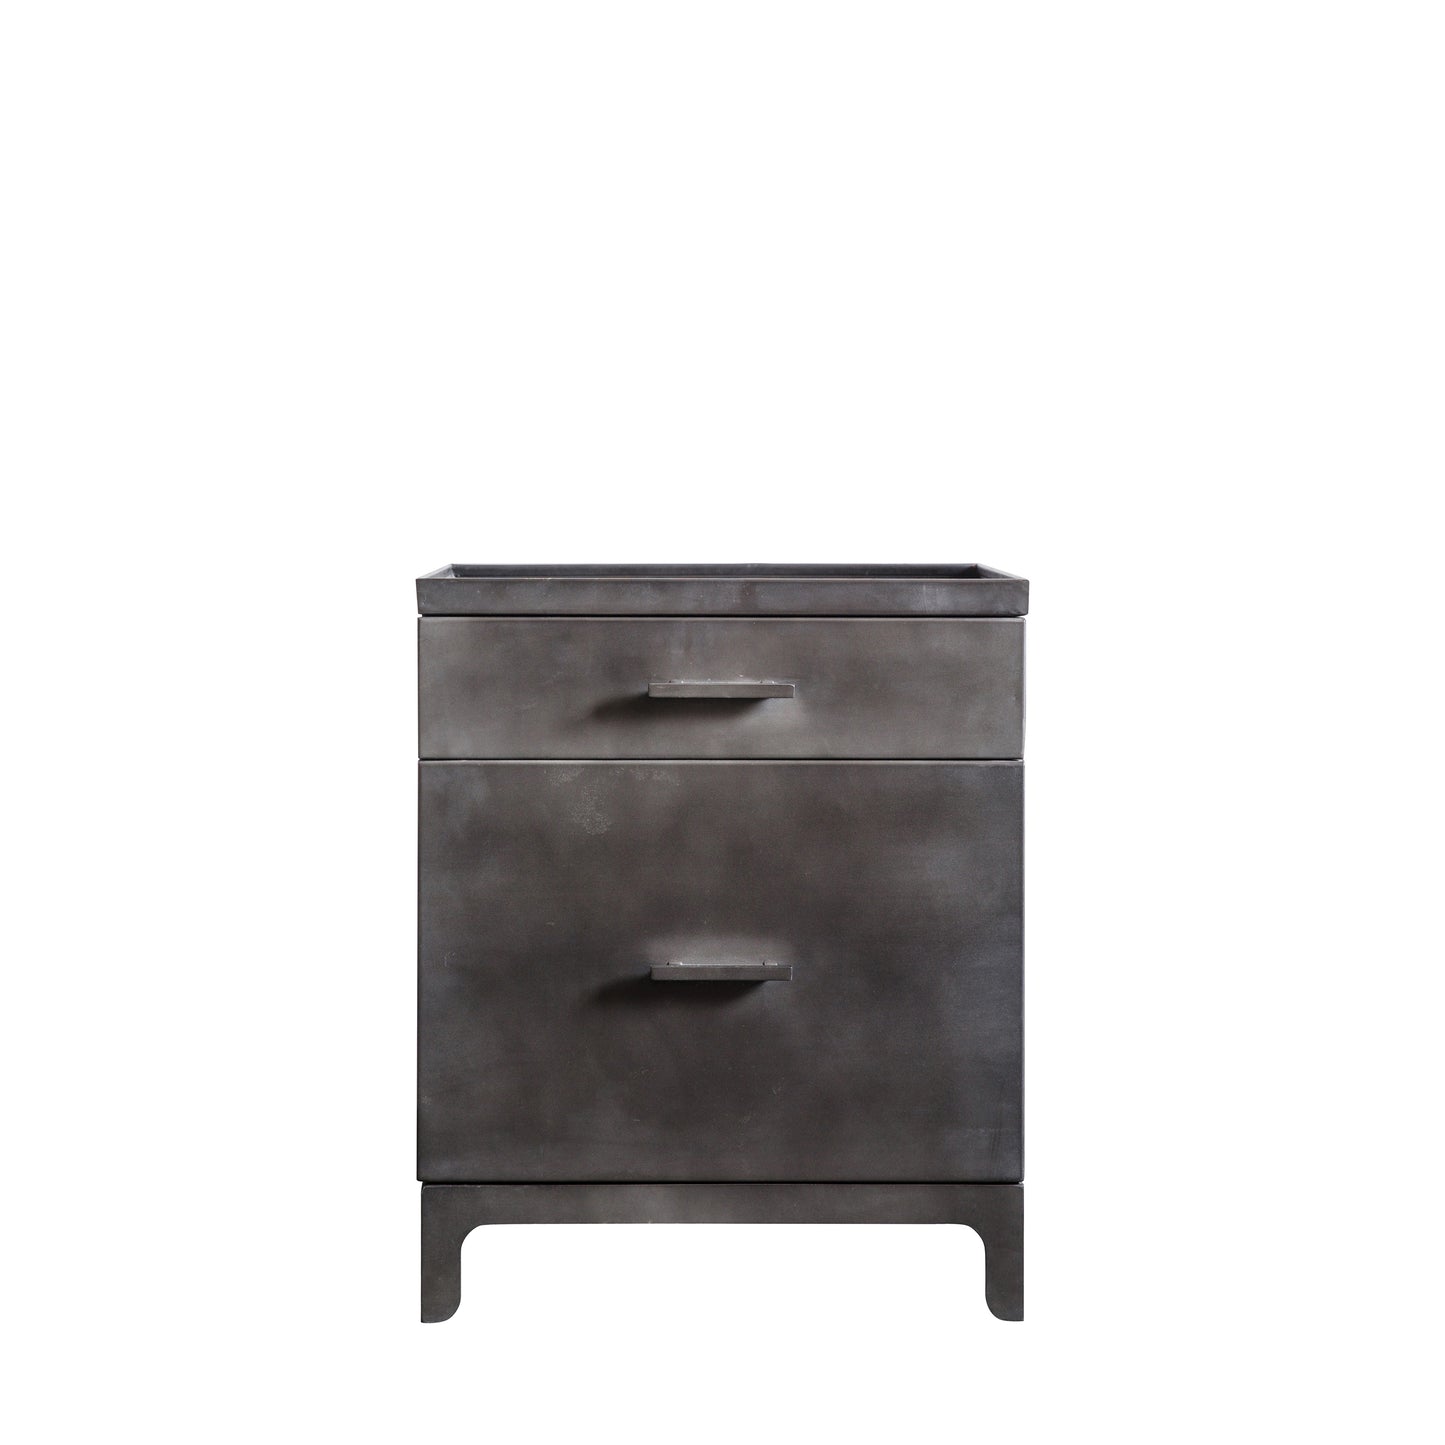 Load image into Gallery viewer, A gray nightstand with drawers by Kikiathome.co.uk for interior decor.
